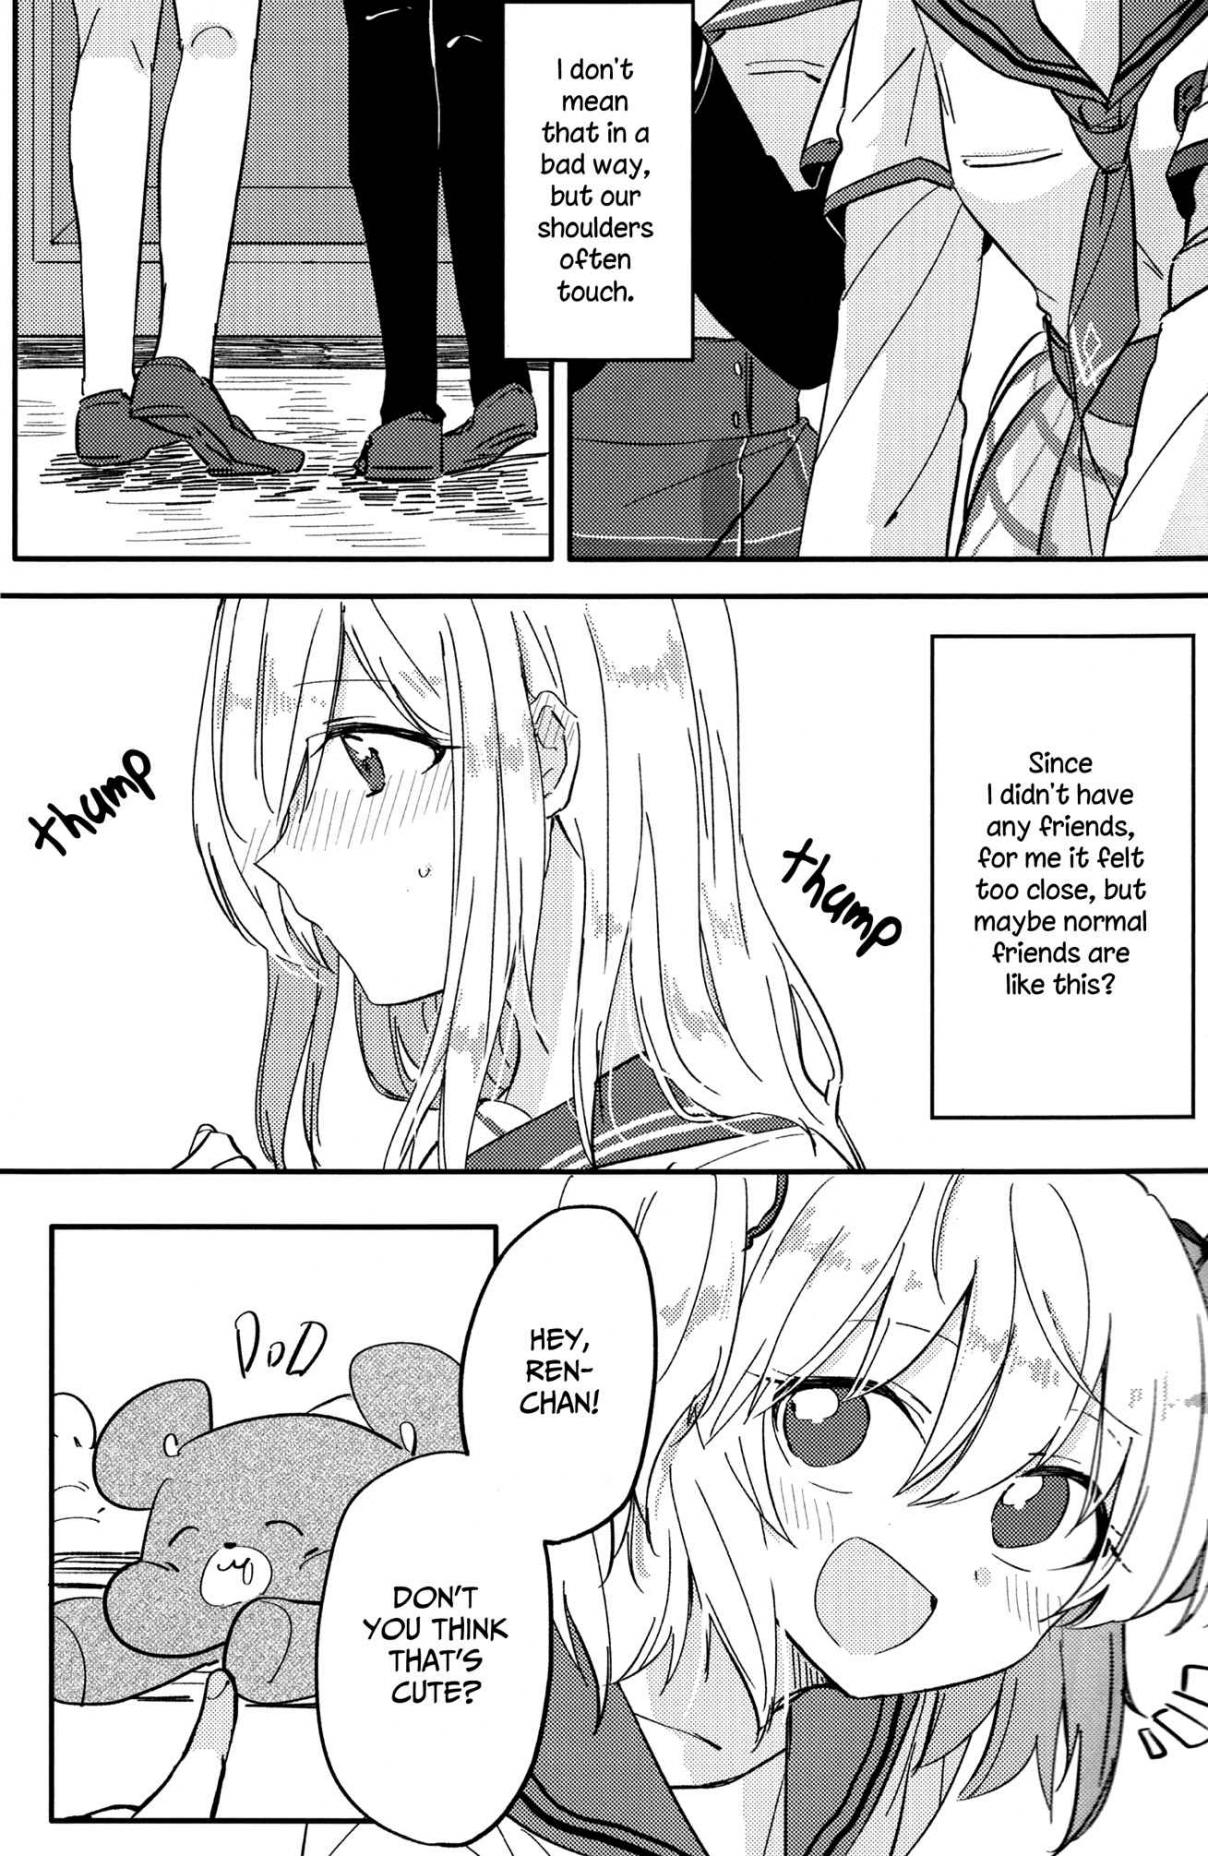 Sweet Collection Vol. 1 Ch. 1 Oneshot